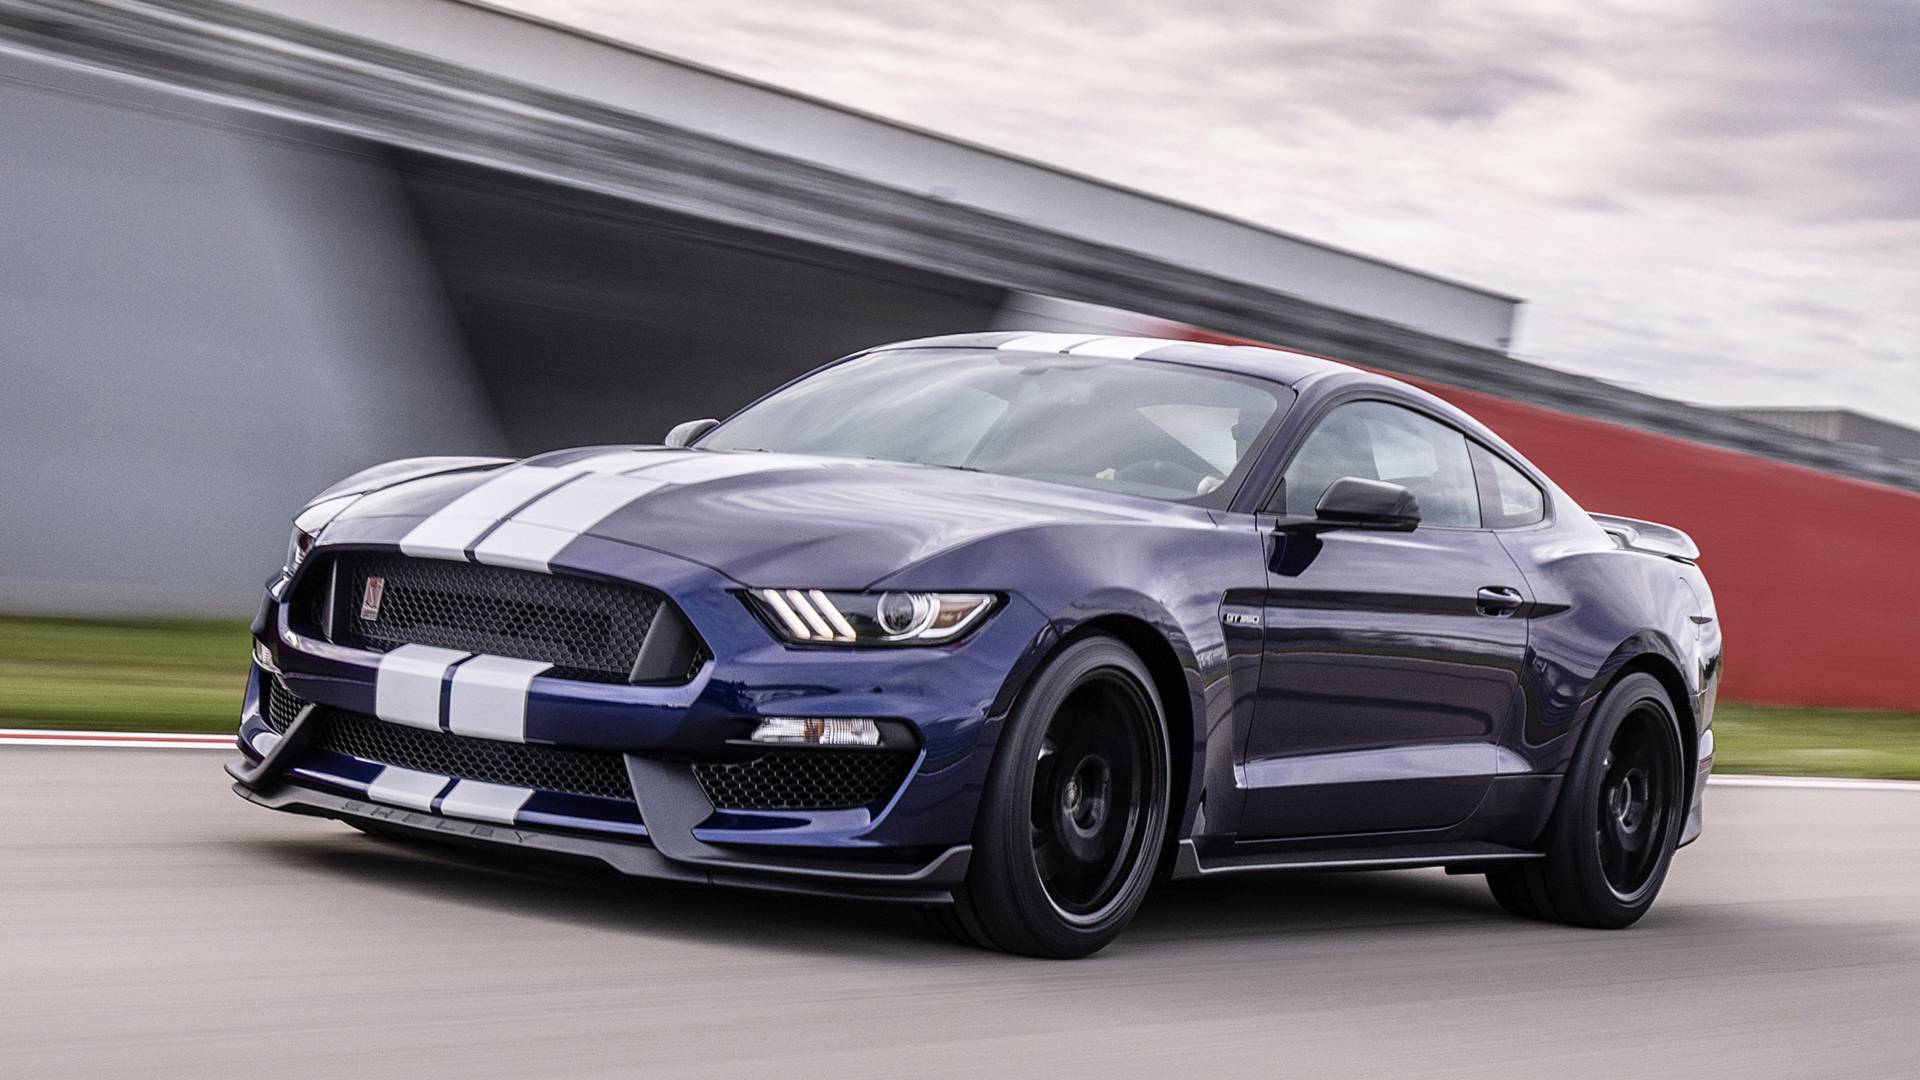 2019 Ford Mustang Shelby GT350 Gets Sharper, More Stylish